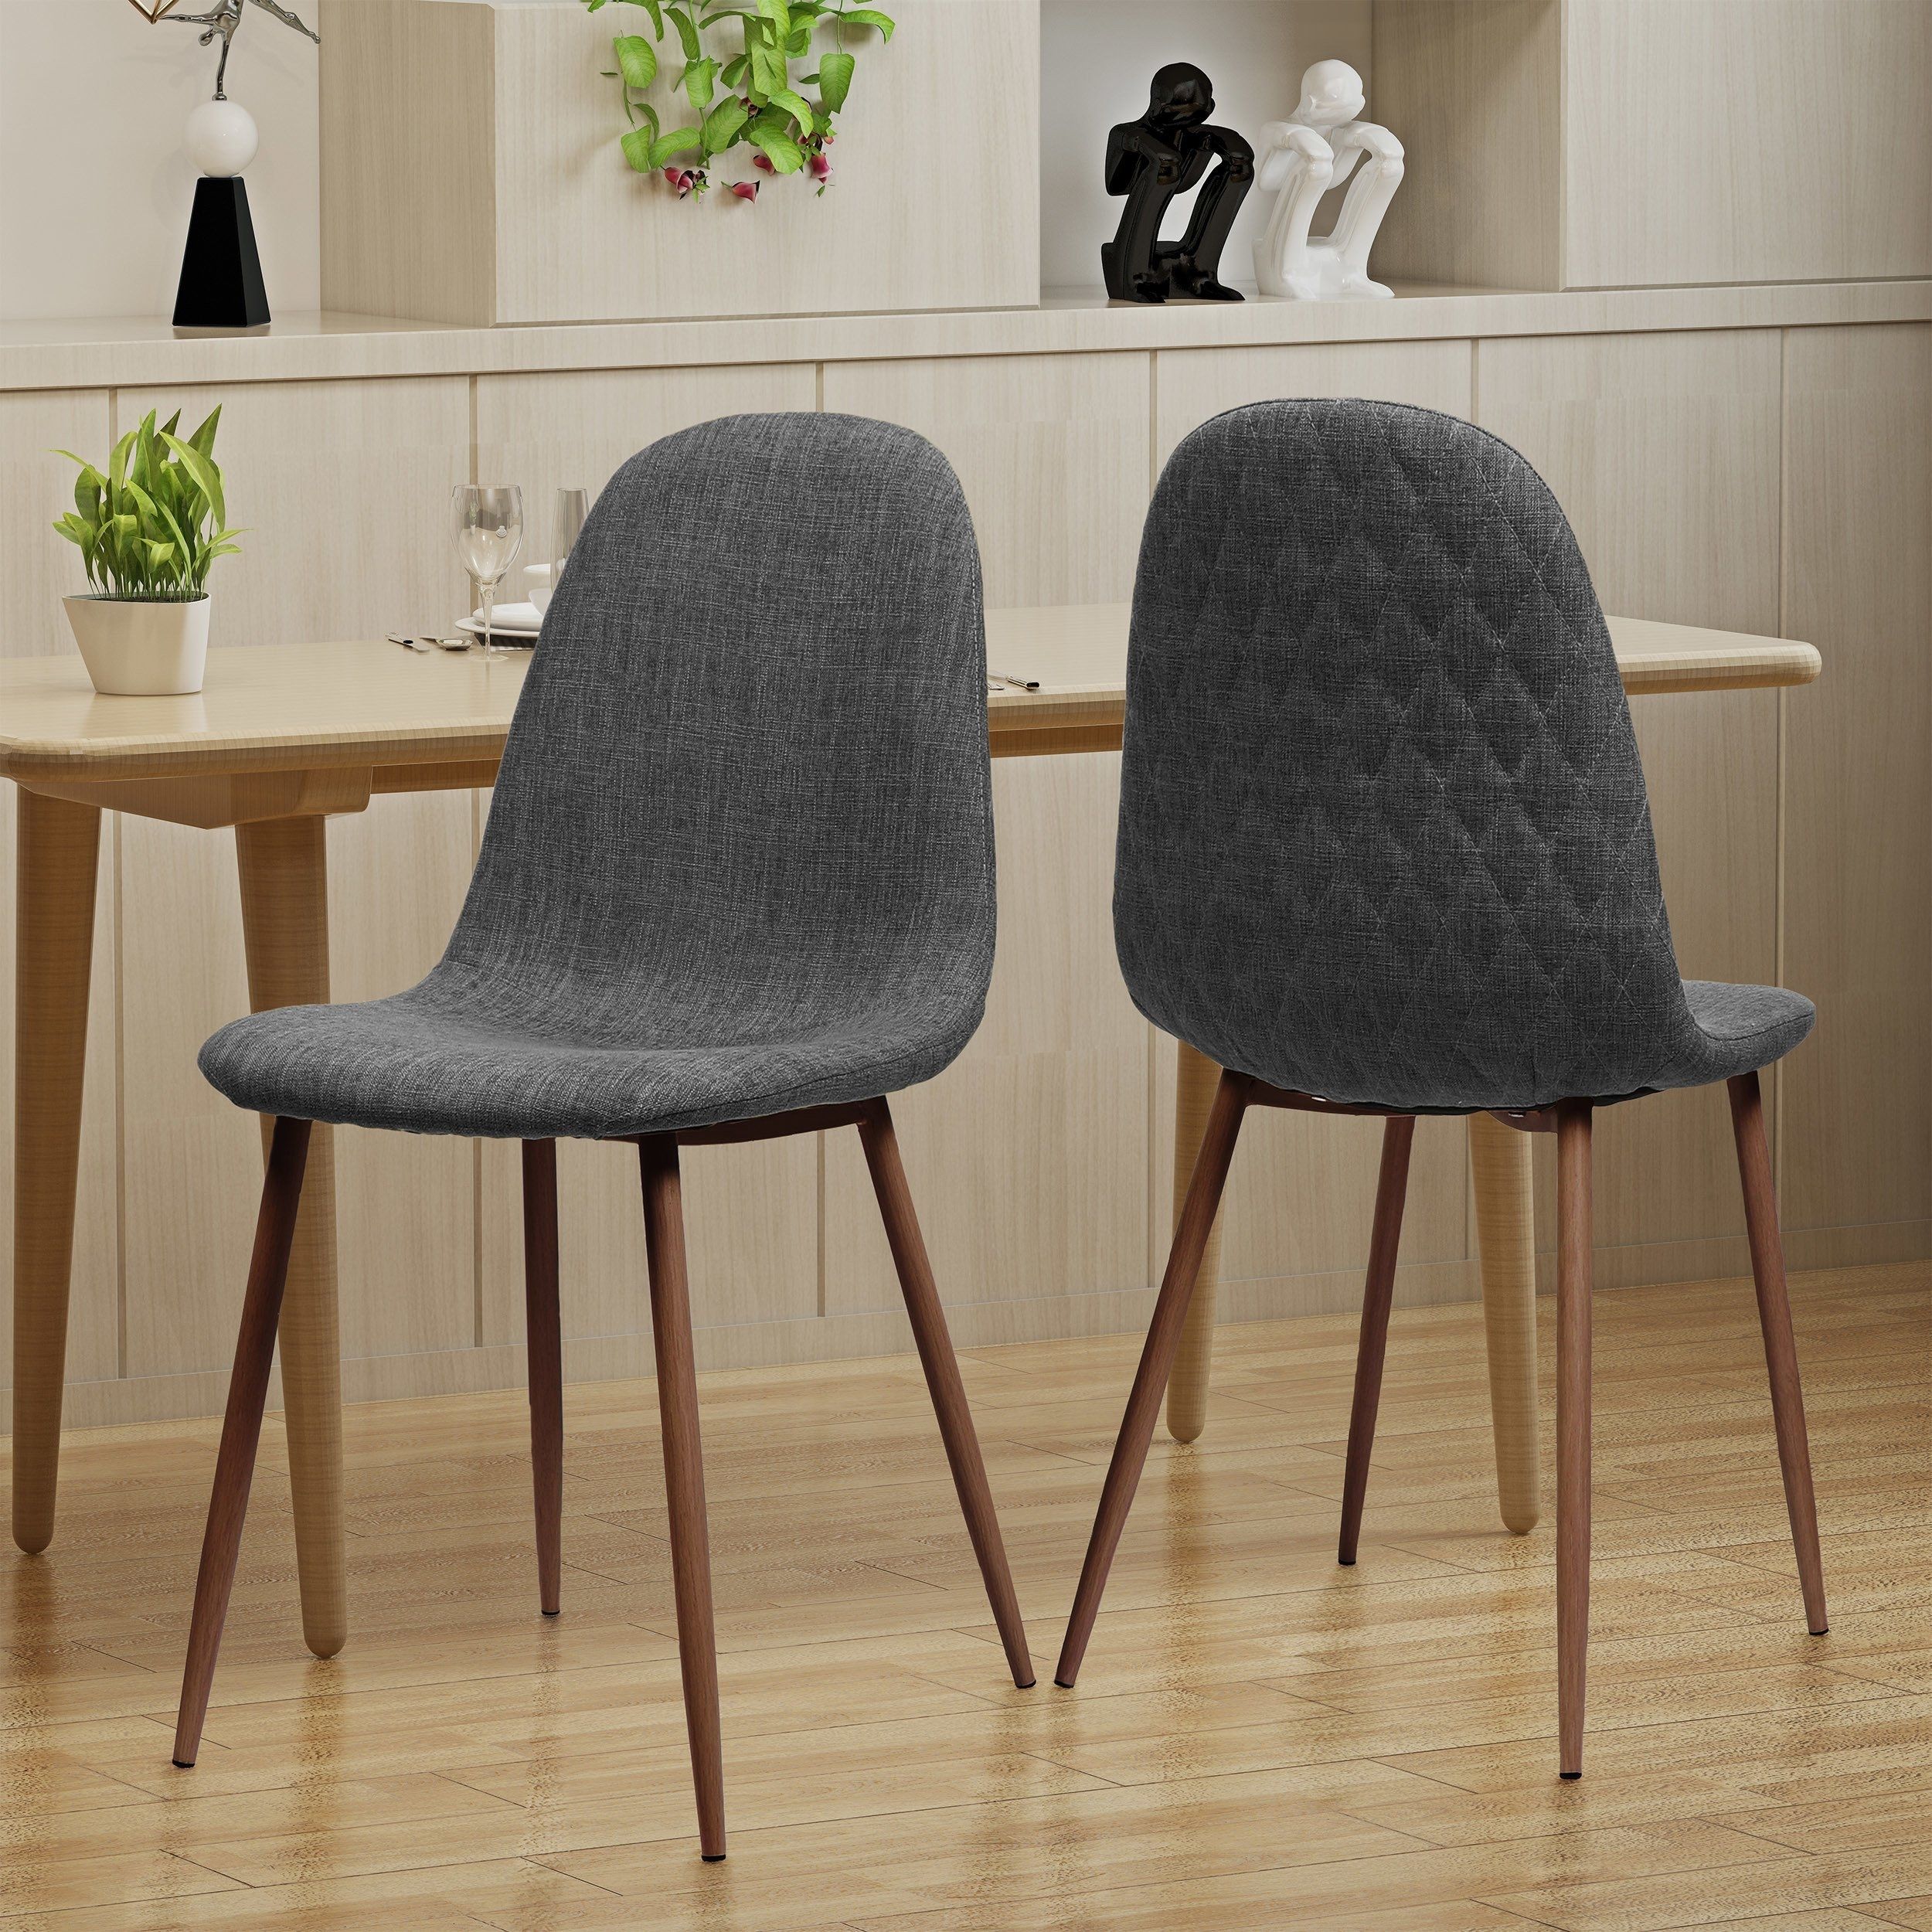 Well Known Caden Upholstered Side Chairs Regarding Shop Caden Mid Century Fabric Dining Chair (set Of 2)christopher (Photo 5 of 20)